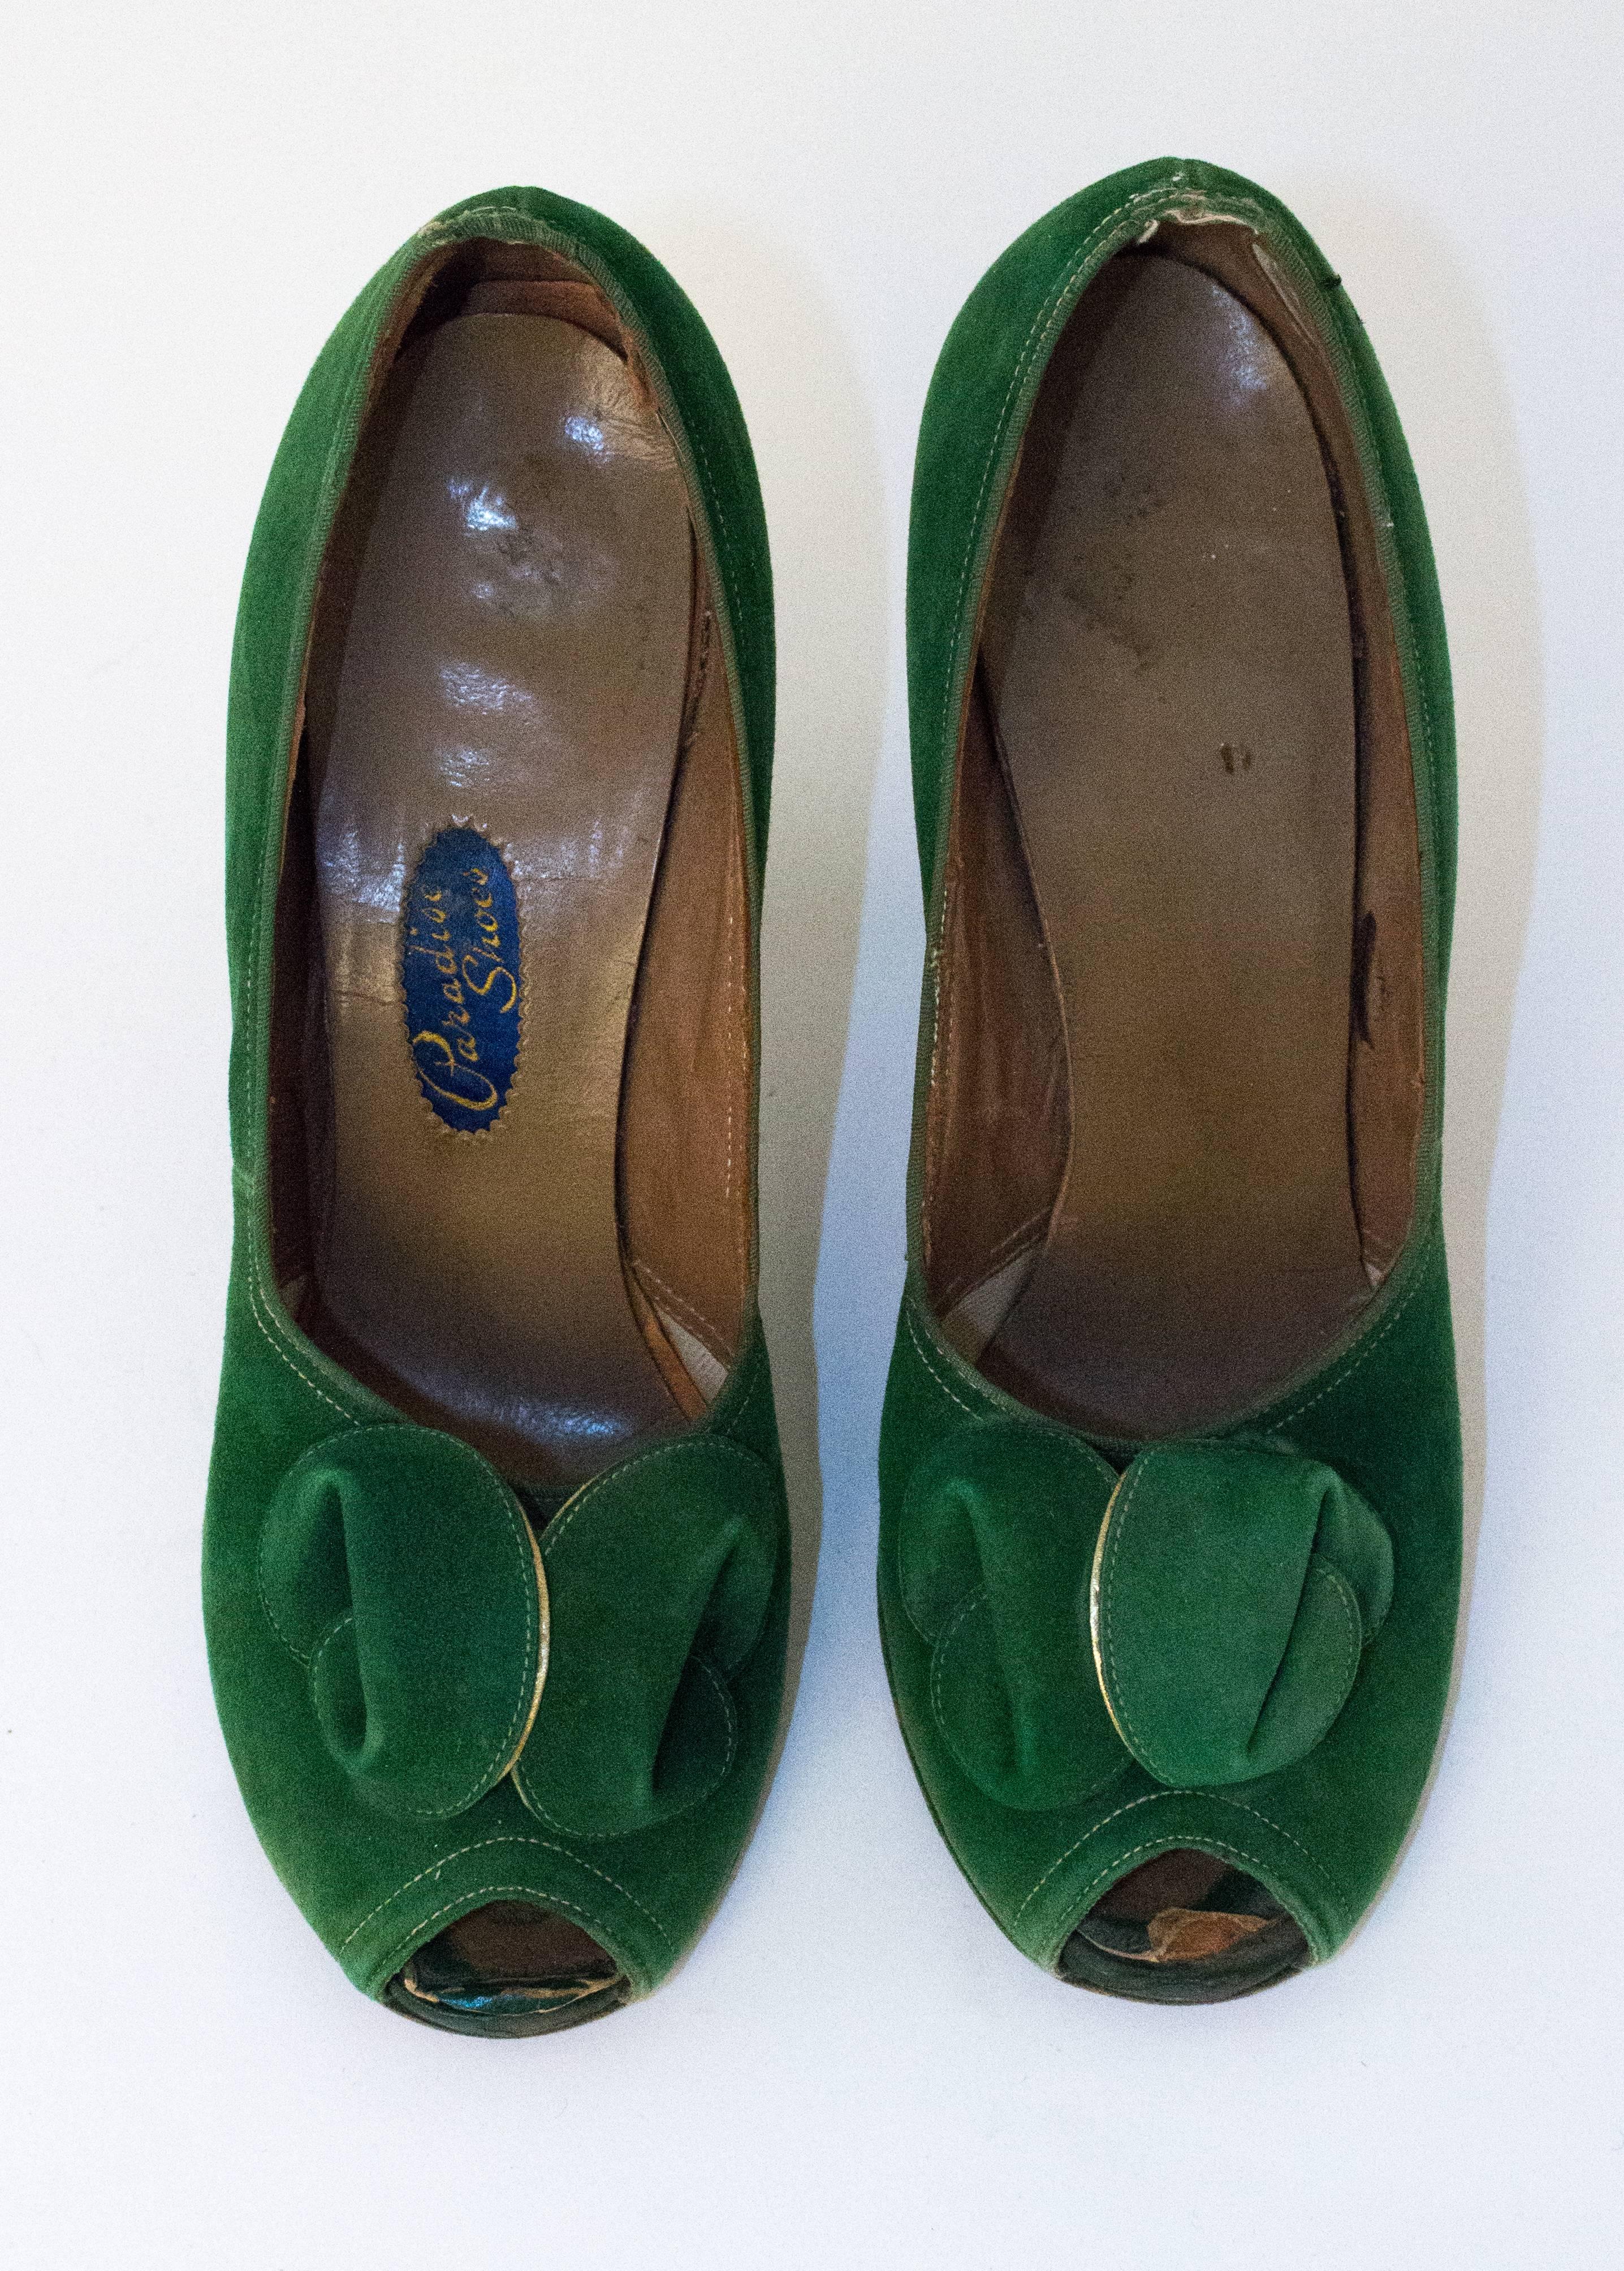 30s Paradise Shoes Green suede Heel. Measures 9inches long from heel to toe.